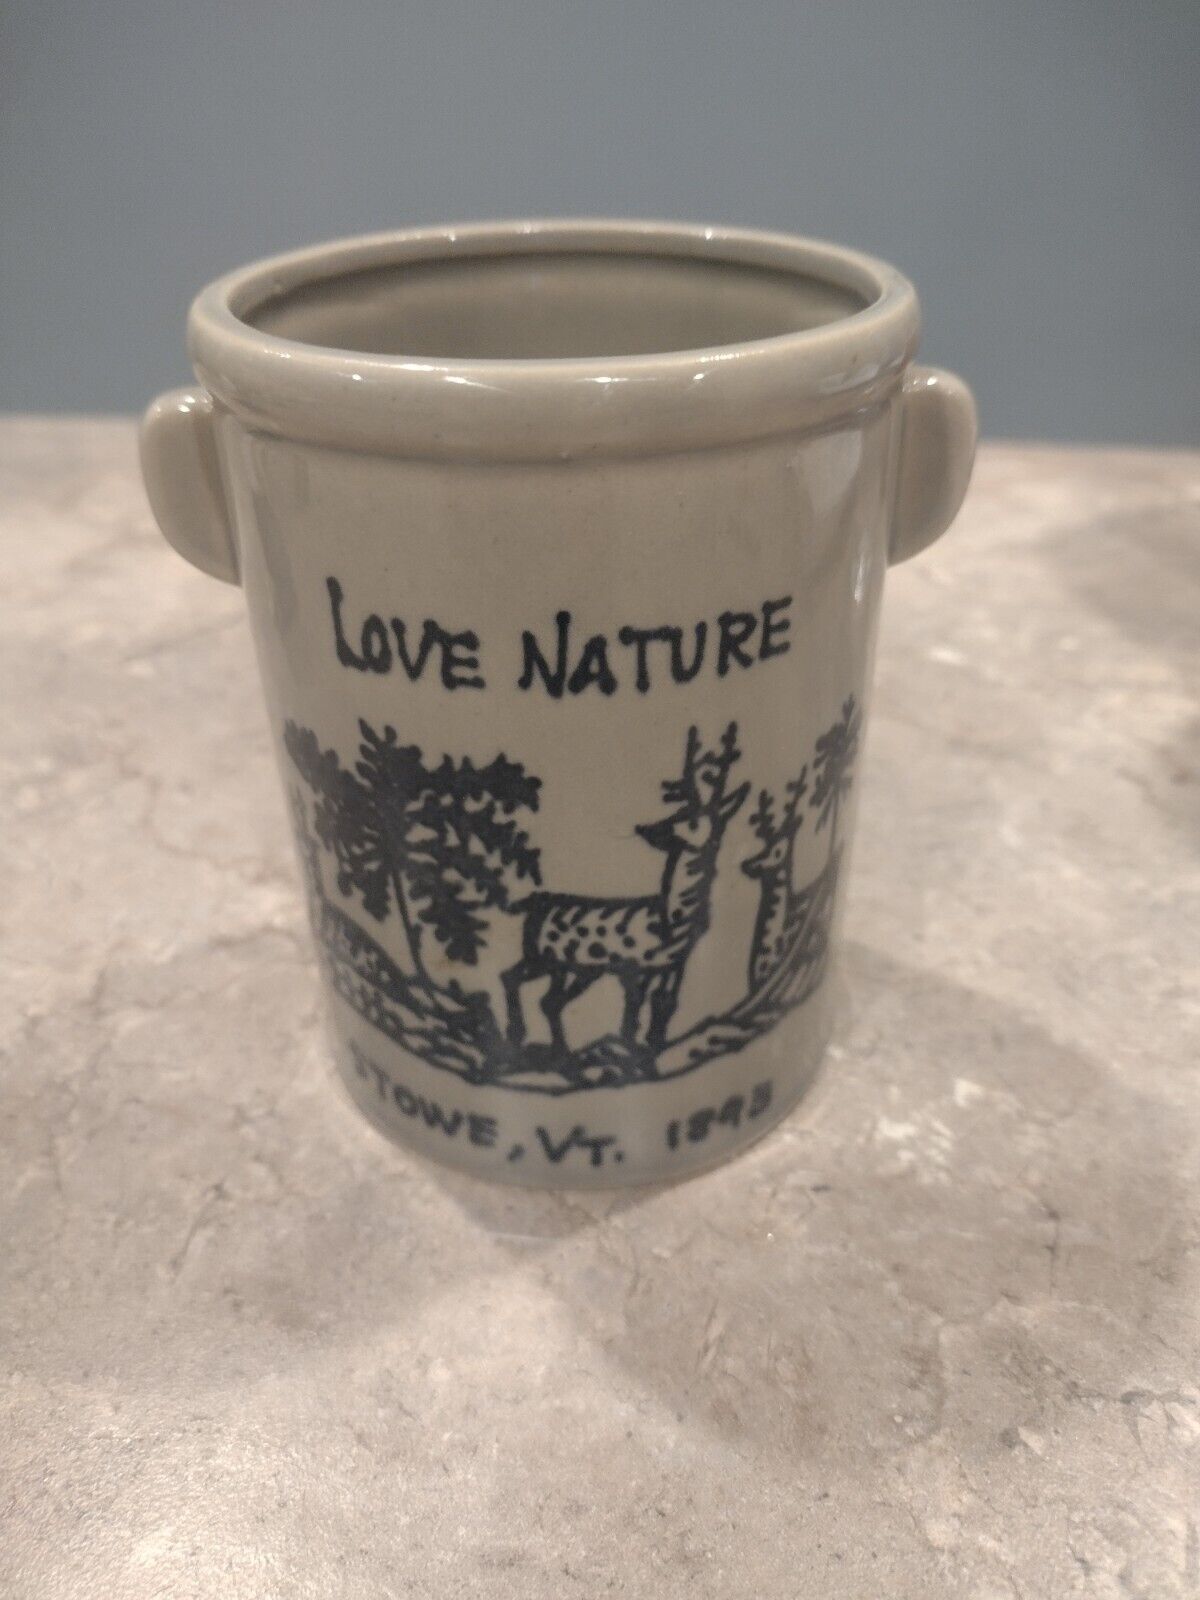 Small Crock Stowe VT 1893. Love Nature